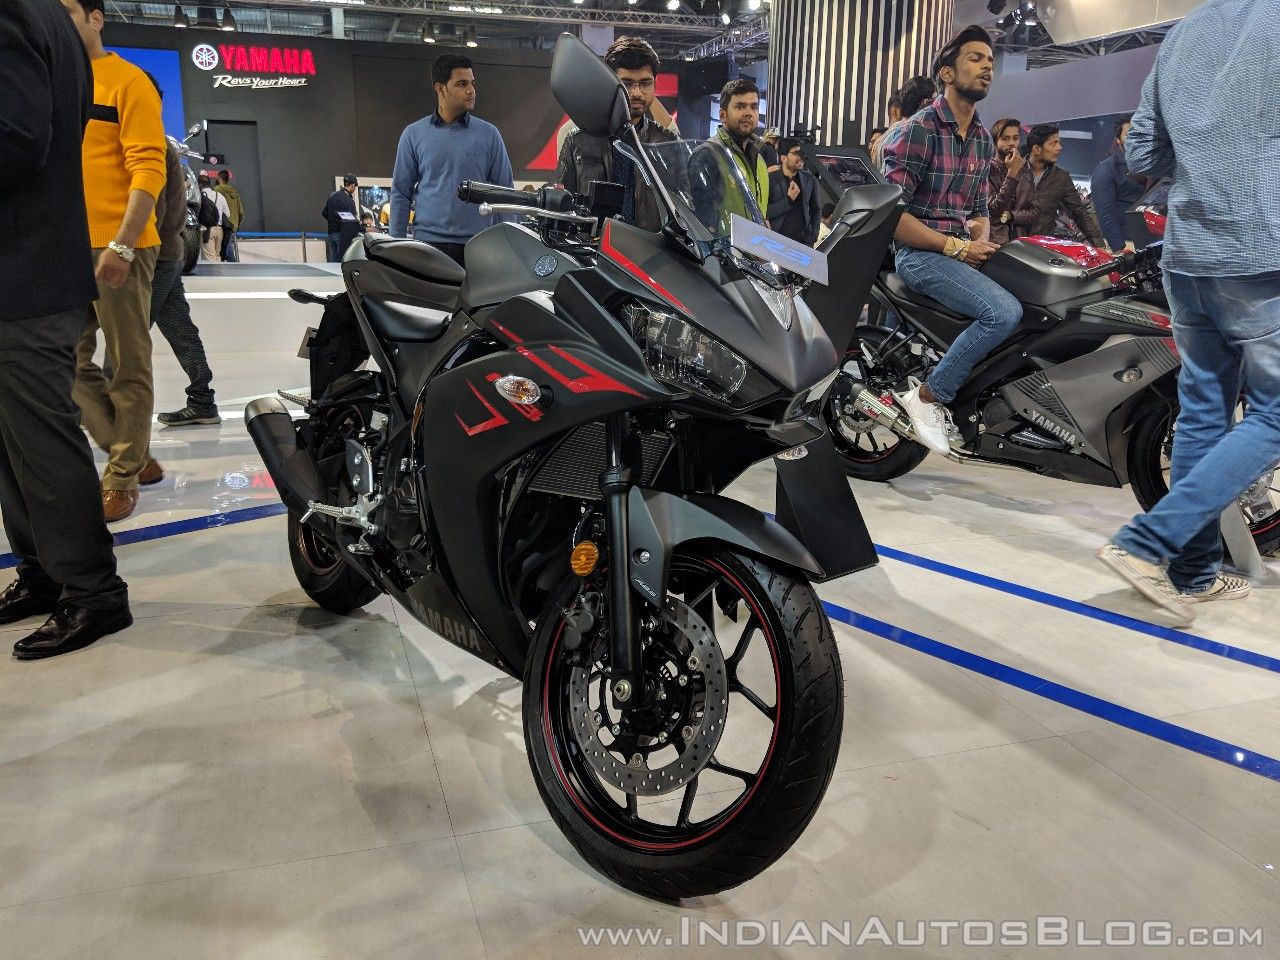 2022 Yamaha R3 India Launch Likely By Diwali This Year